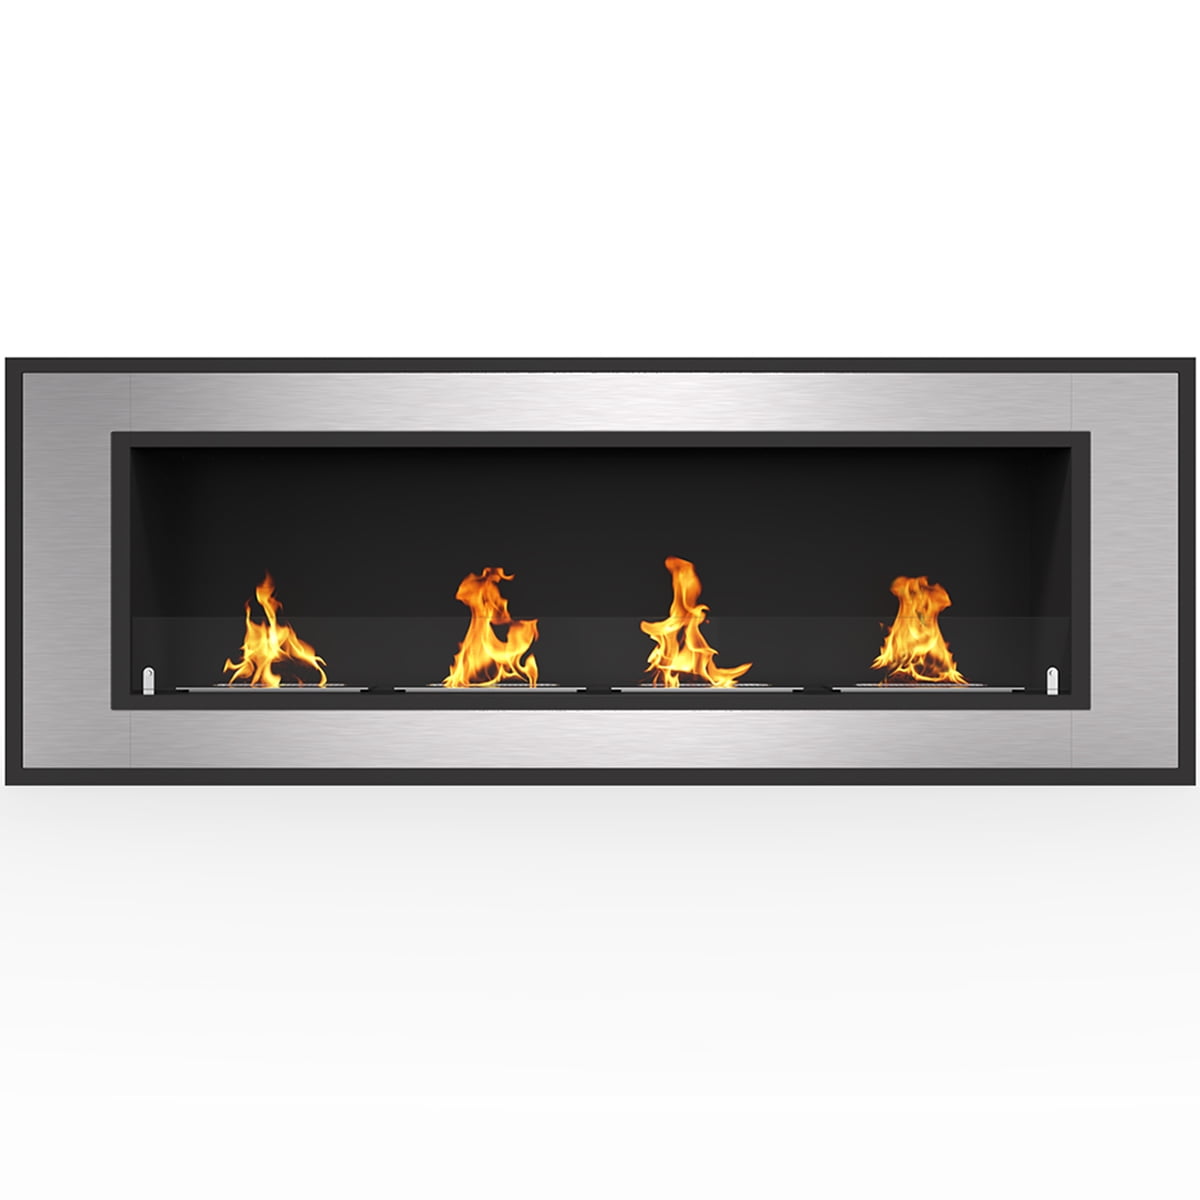 Regal Flame Cynergy 60" Ventless Built In Wall Recessed Bio Ethanol Wall Mounted Fireplace Similar Electric Fireplaces, Gas Logs